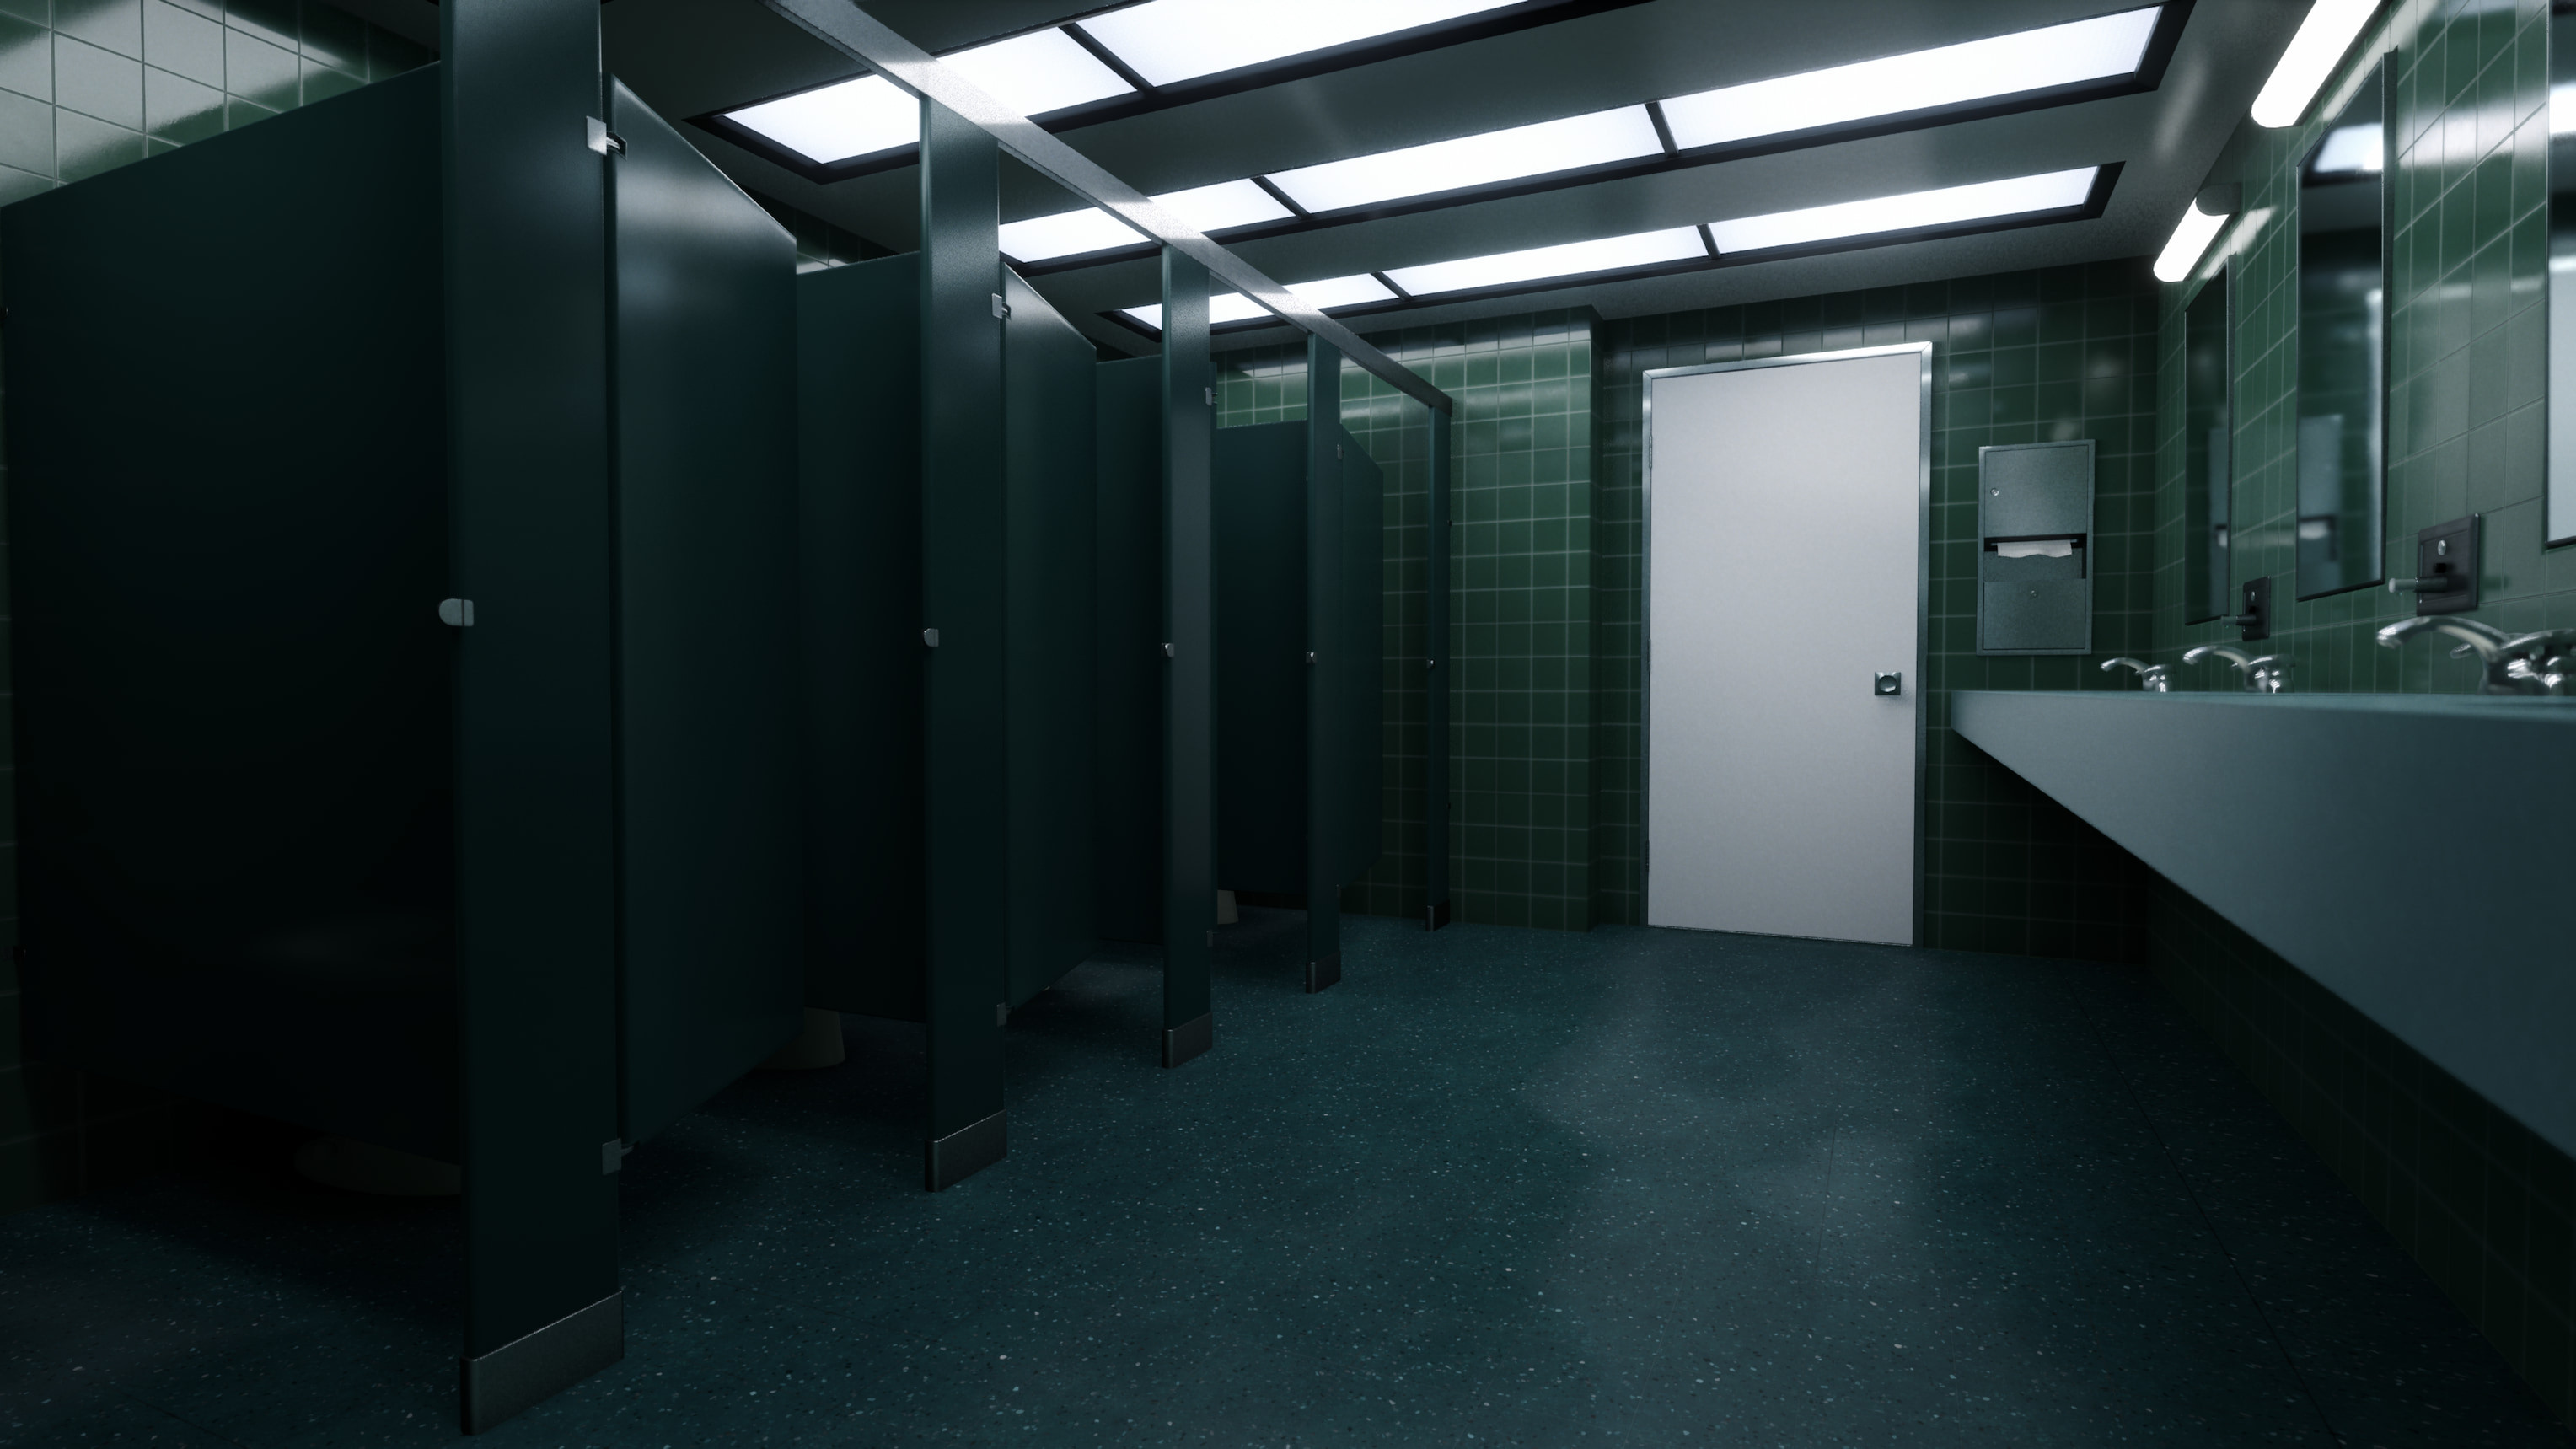 The dark green bathroom is such a nice contrast to the bright green of the main MDR space. Originally I hadn't intended to include it, but I had so much fun making it.